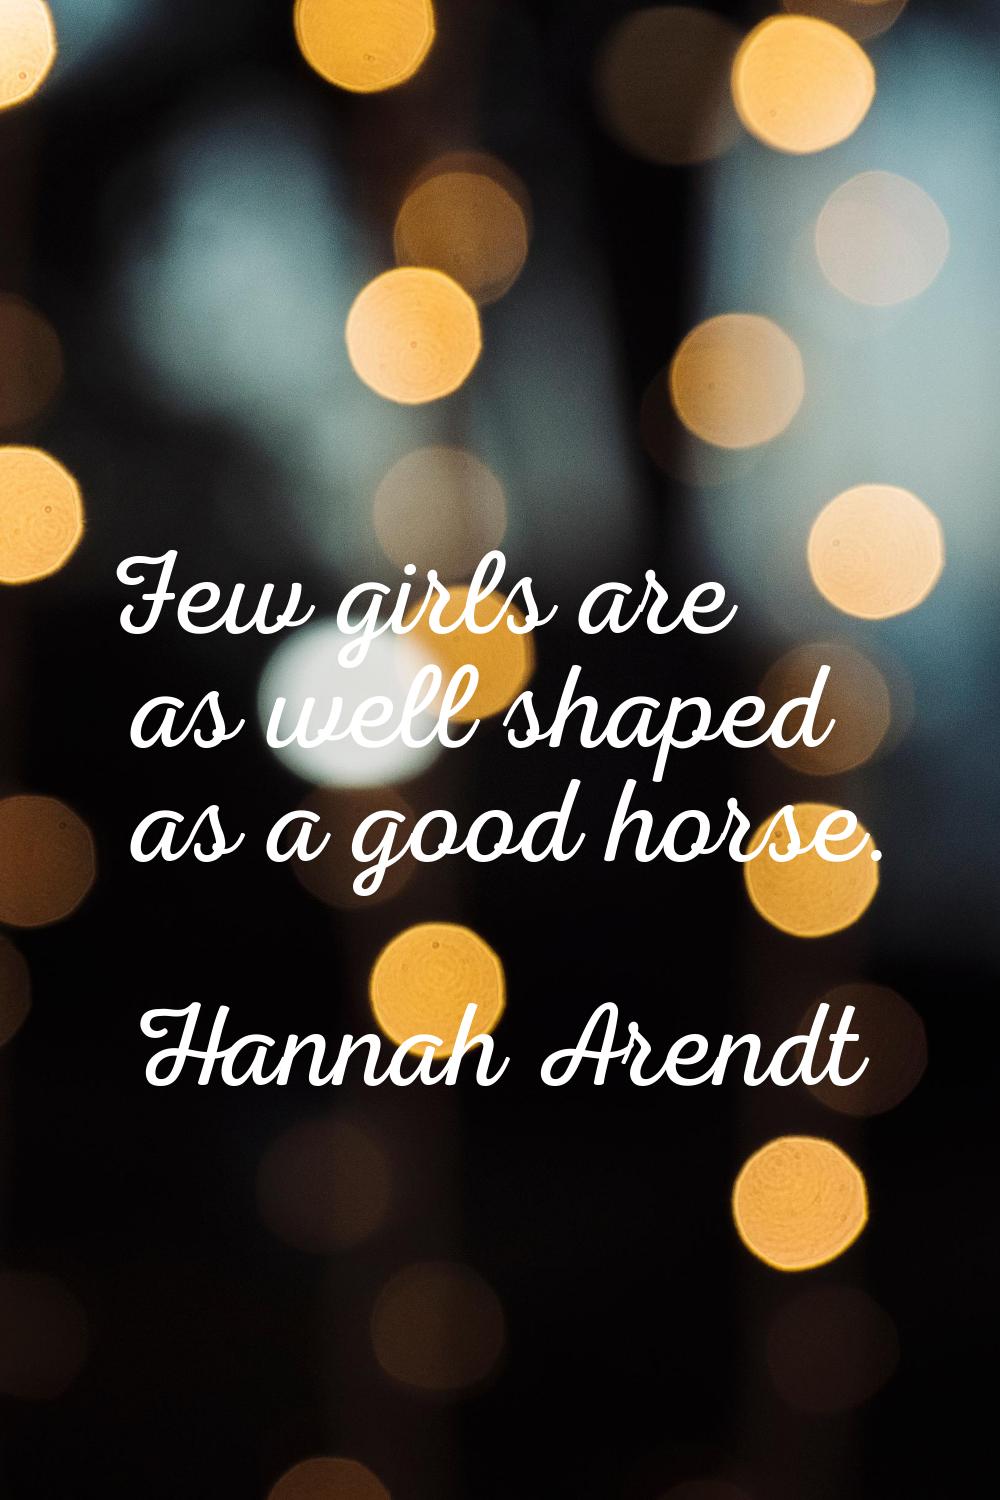 Few girls are as well shaped as a good horse.